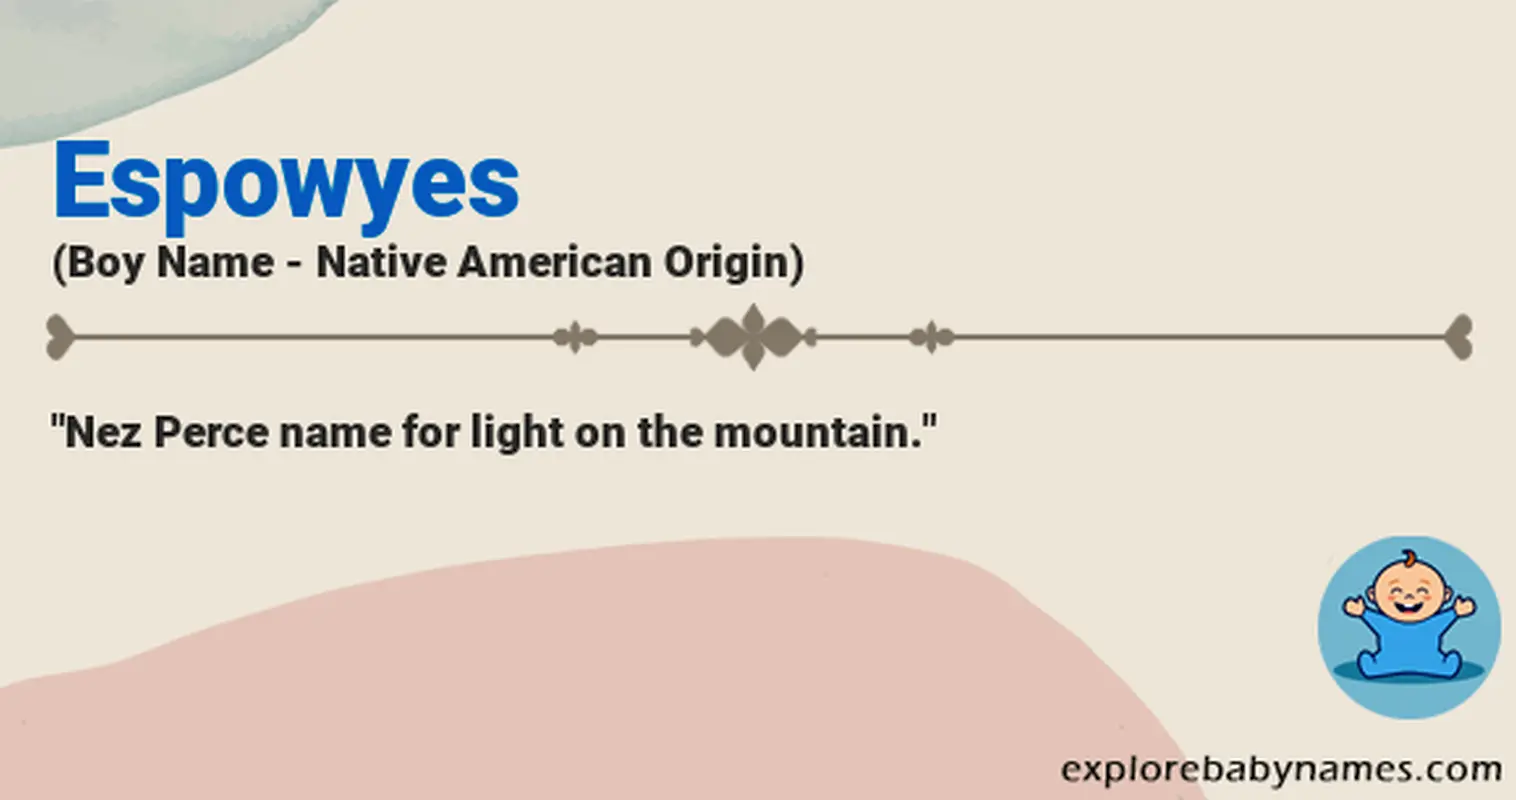 Meaning of Espowyes